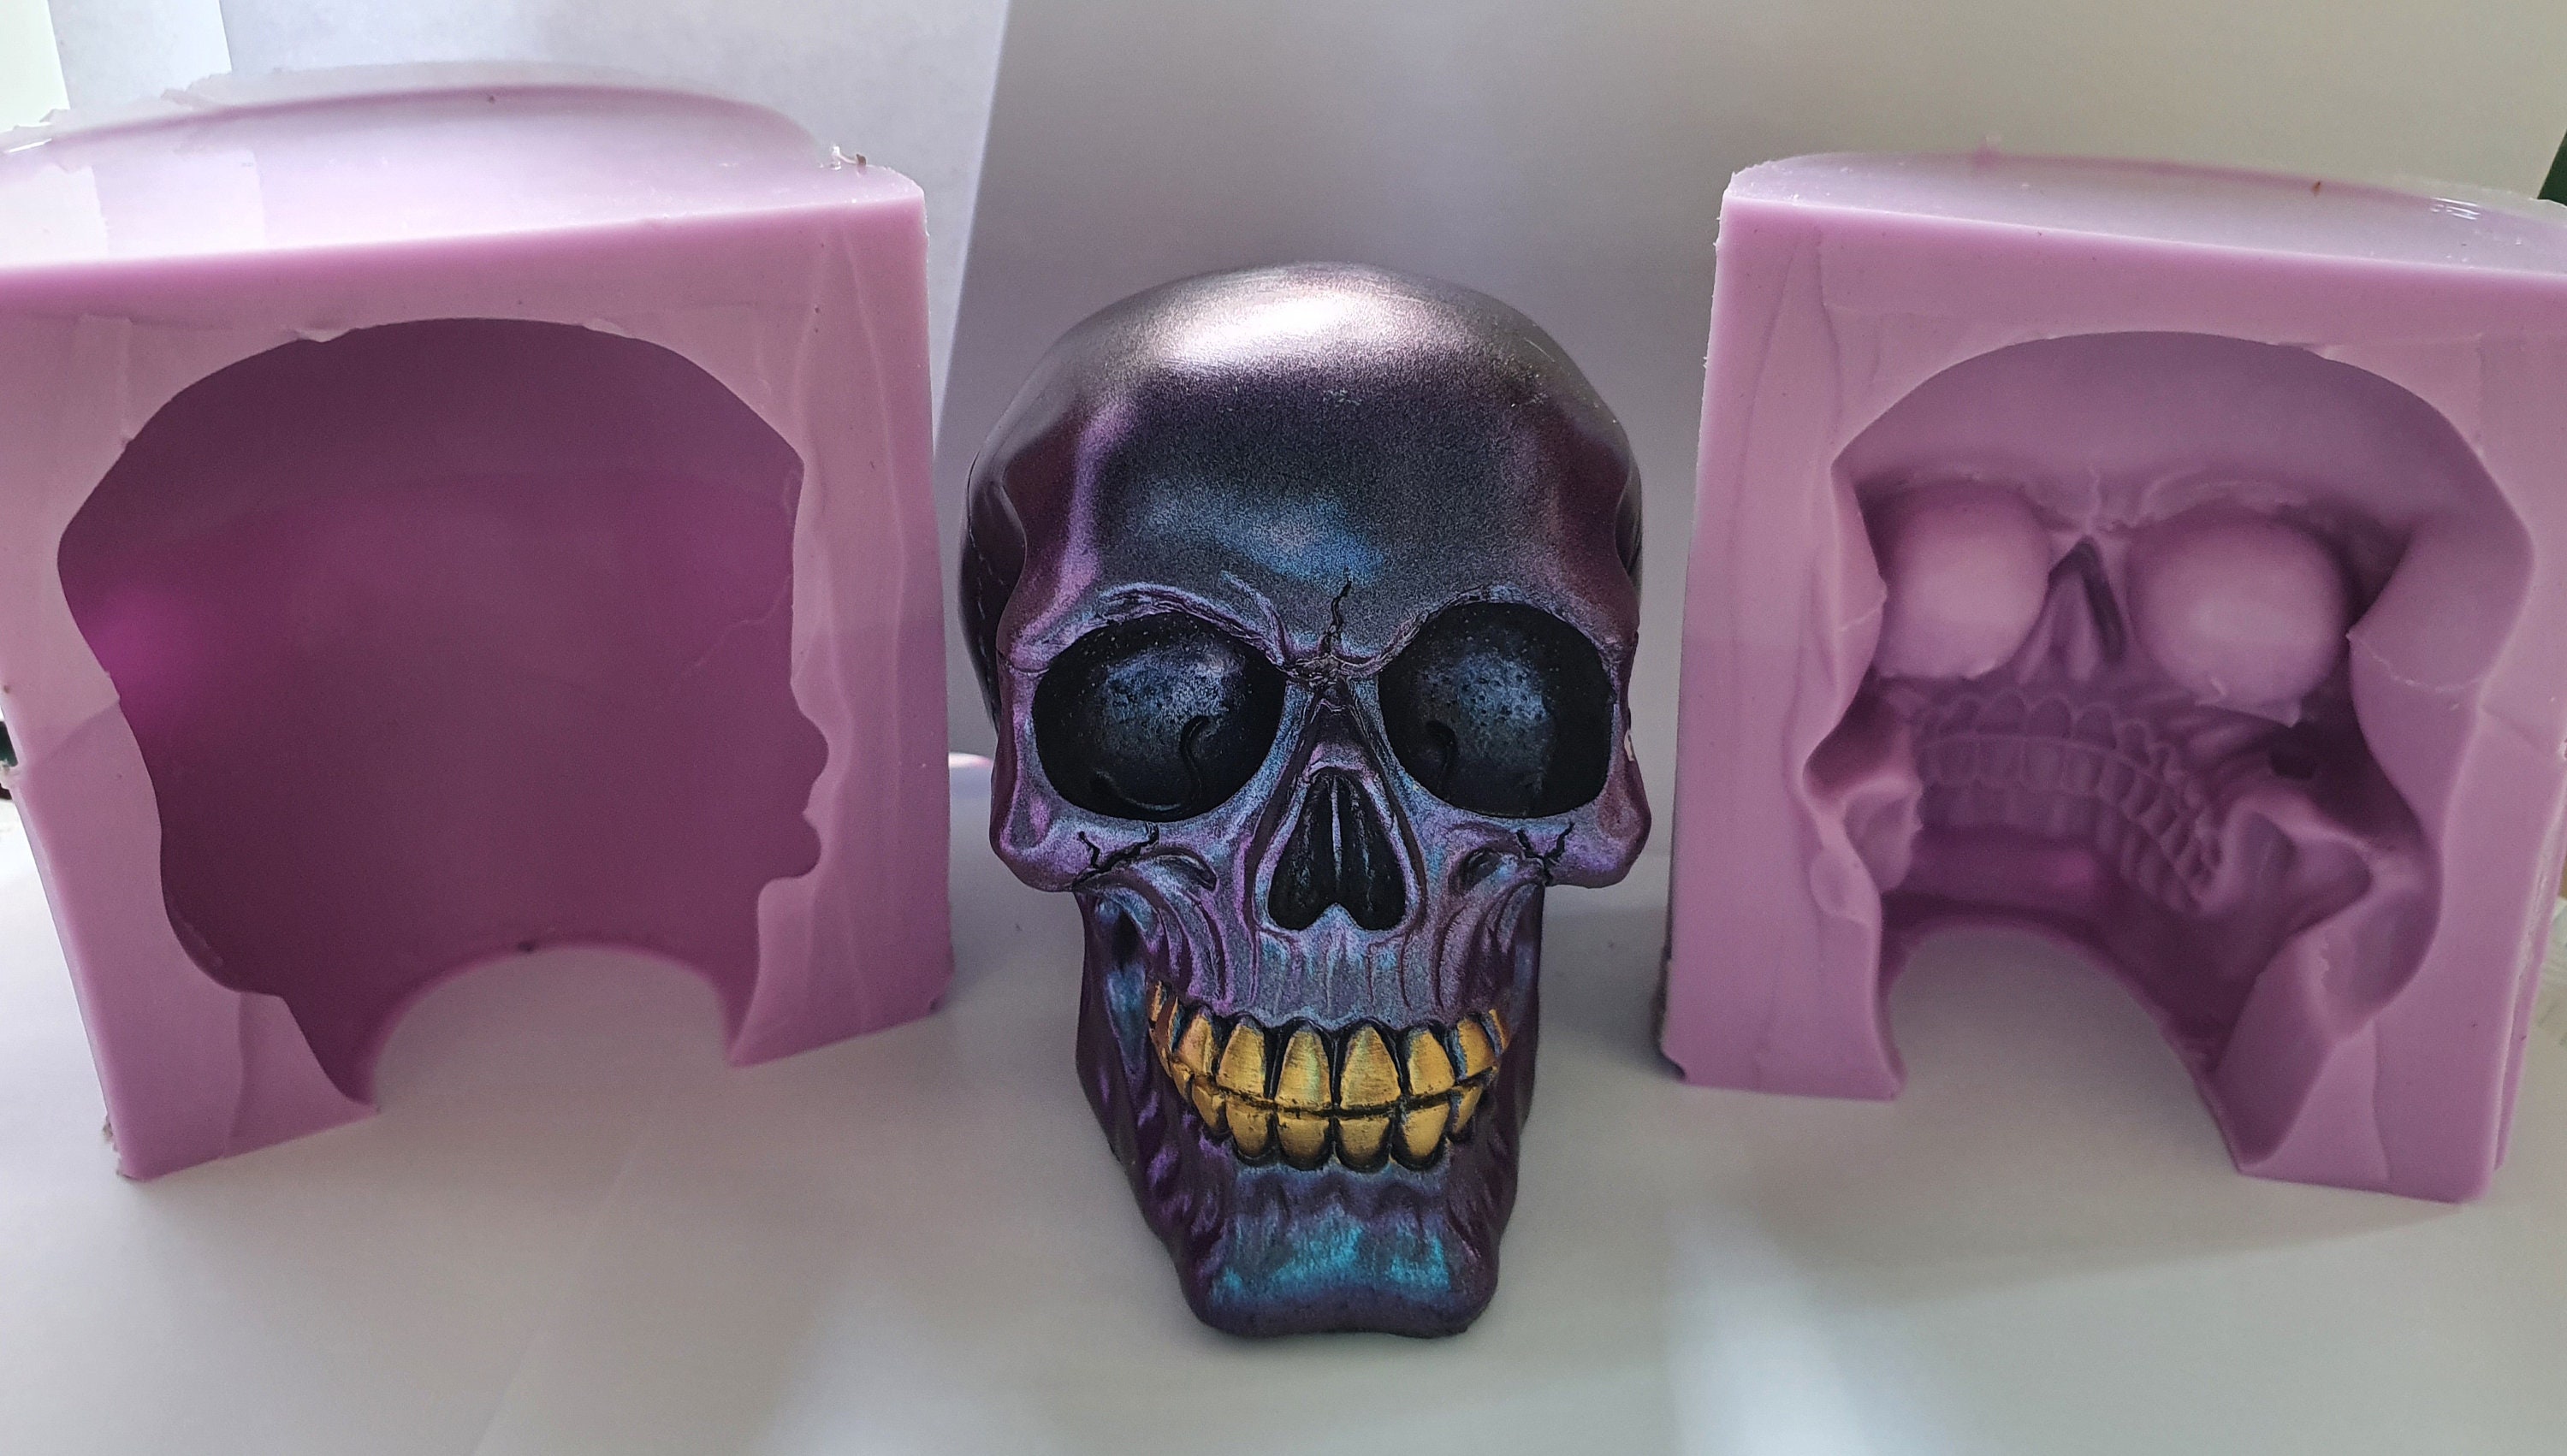 Skull mold with wolf , silicone mold for candles, resin, soa